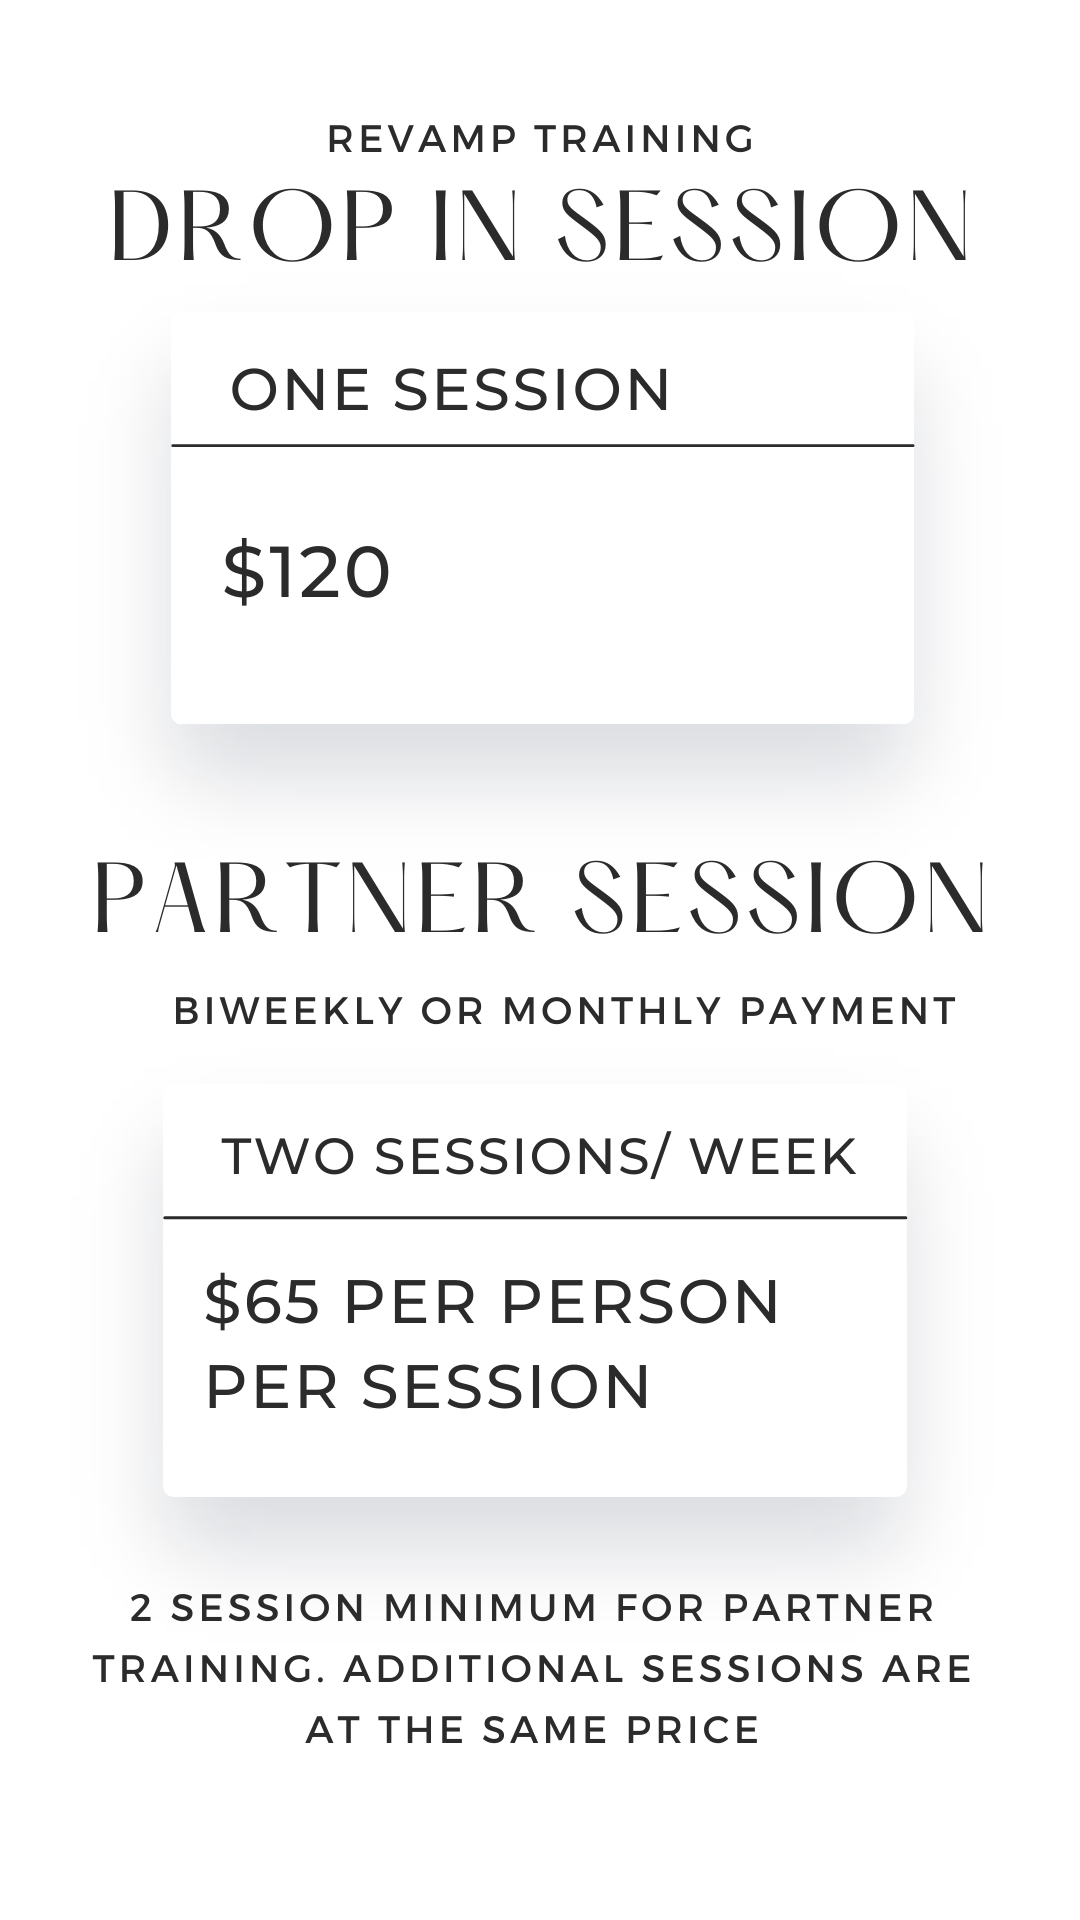 One session and partner session pricing